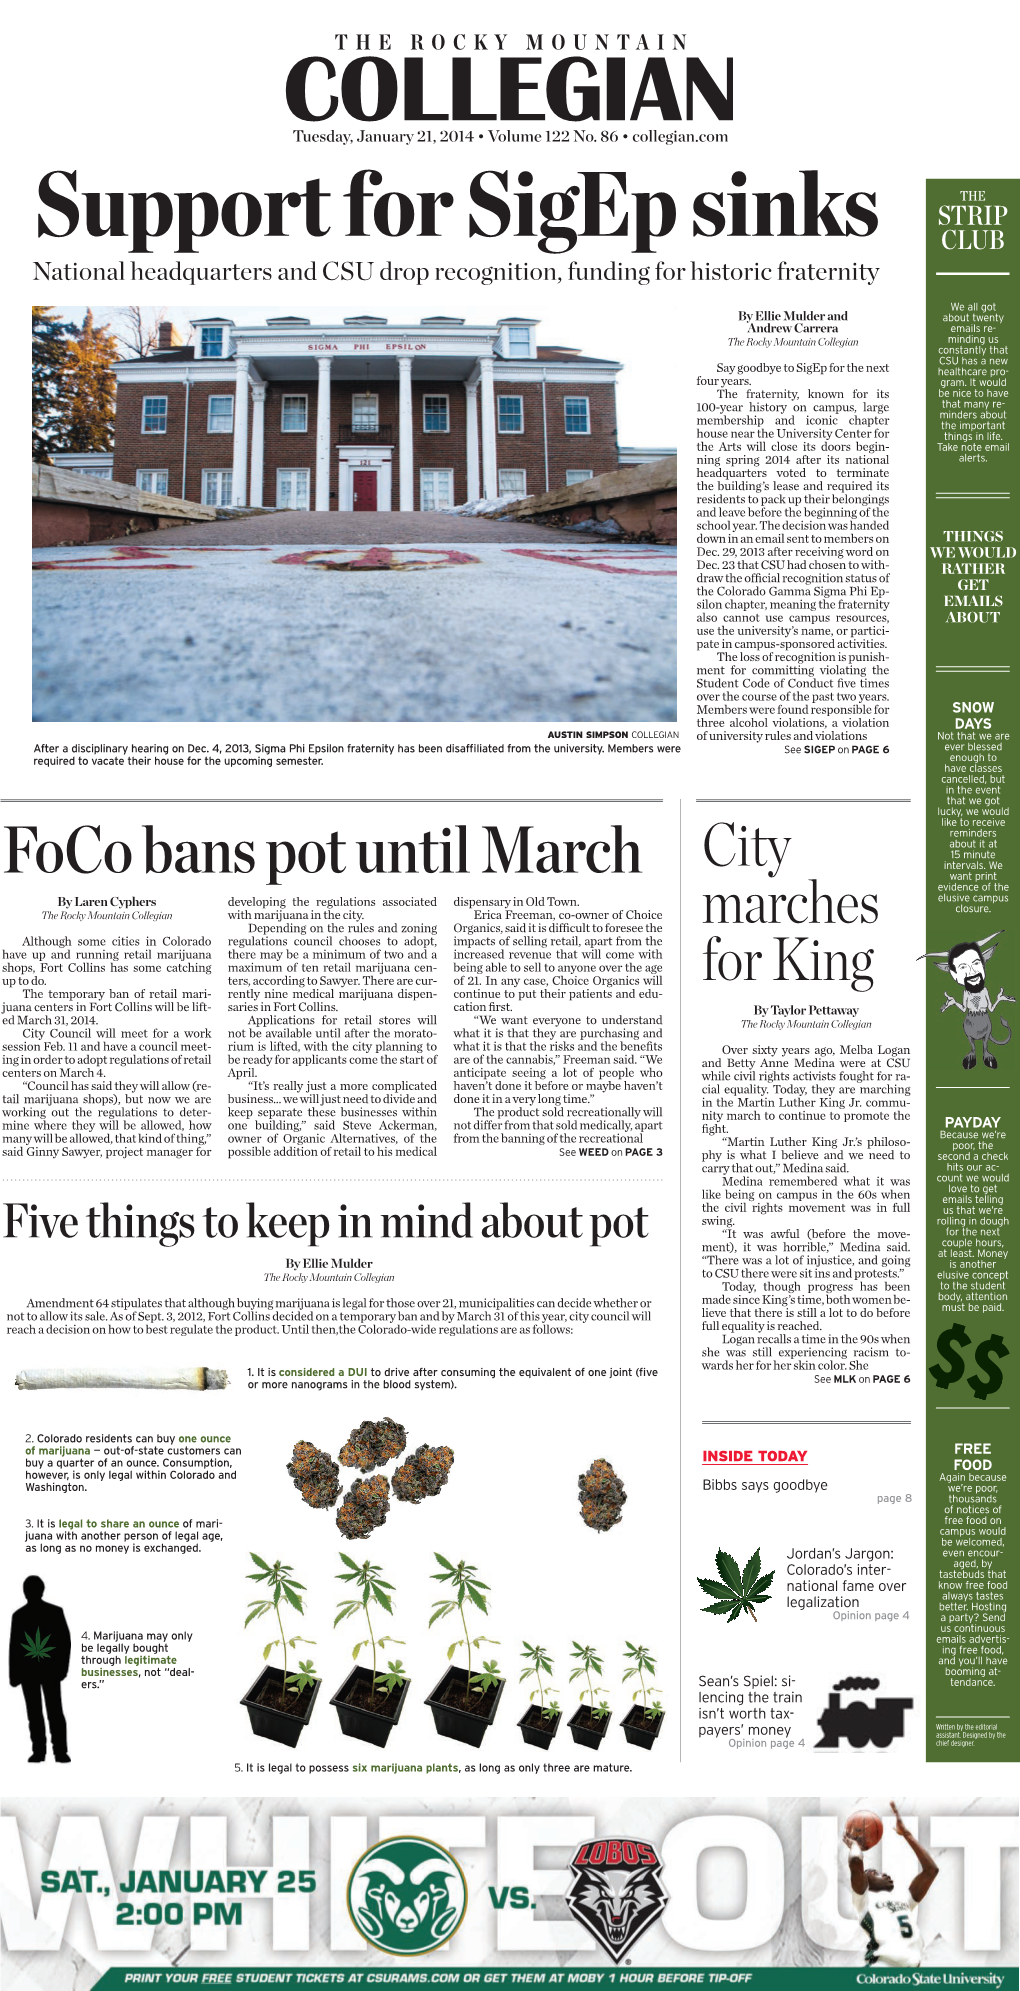 Foco Bans Pot Until March Want Print Evidence of the Elusive Campus by Laren Cyphers Developing the Regulations Associated Dispensary in Old Town